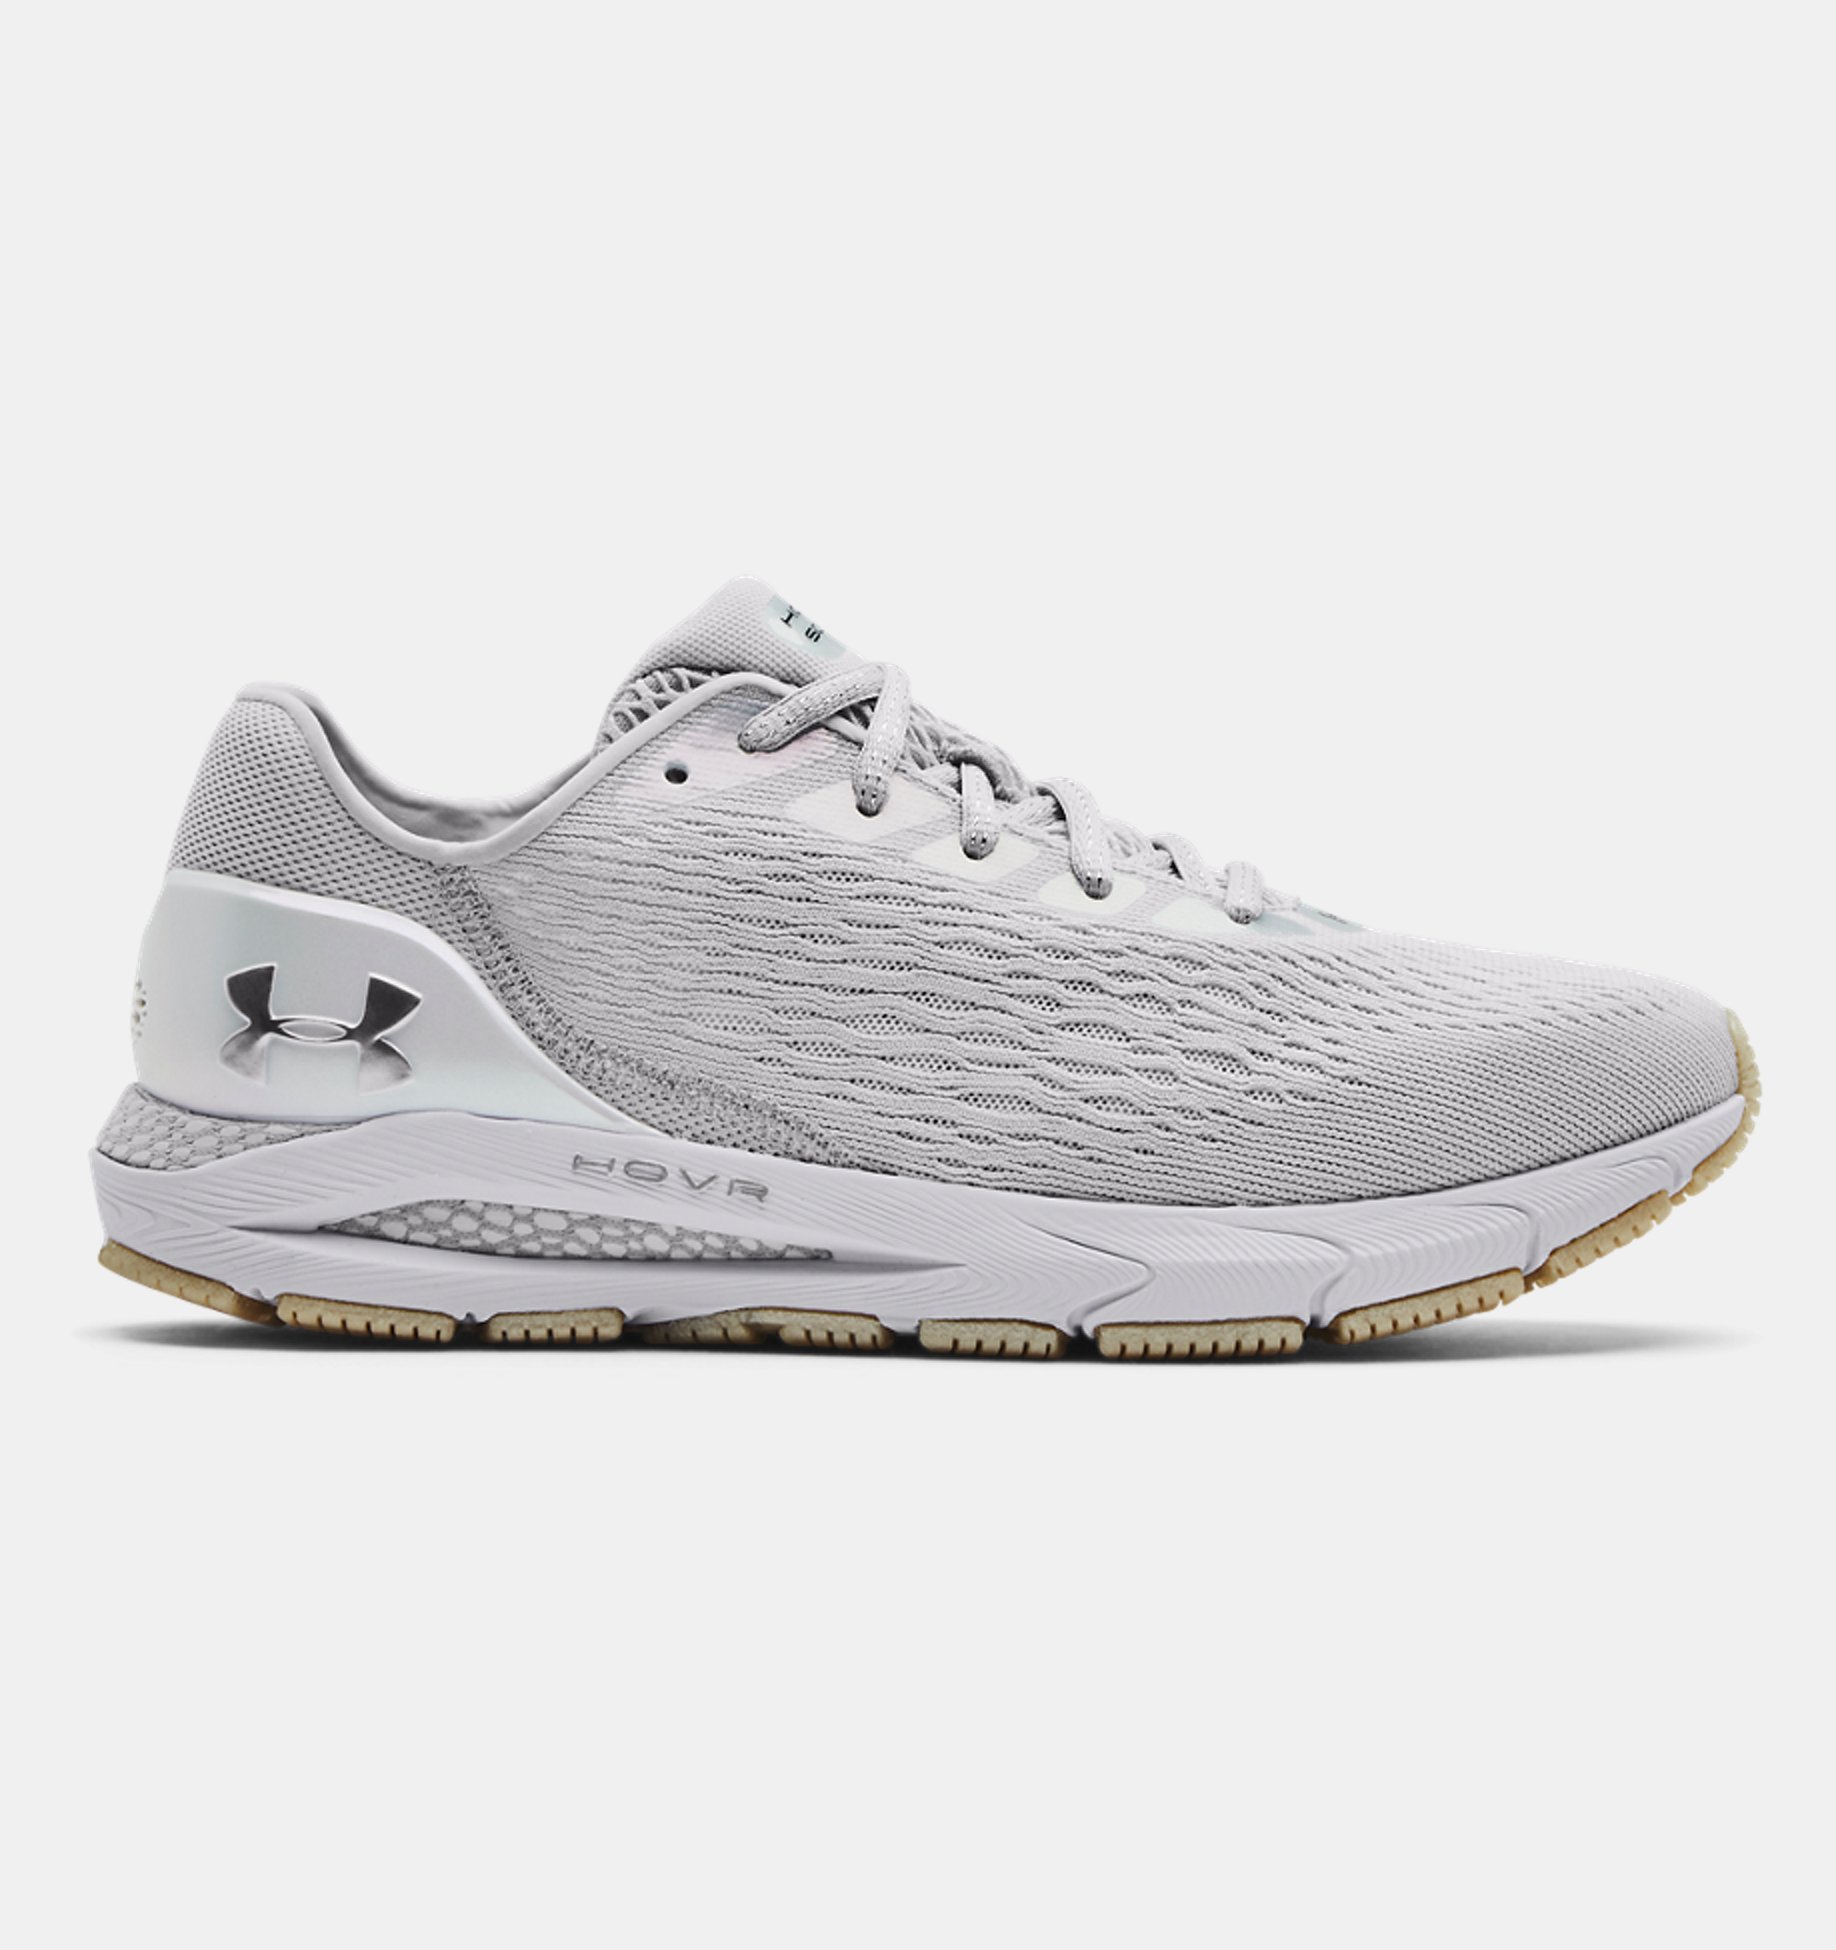 Under Armour Womens HOVR Sonic 3 Running Shoe